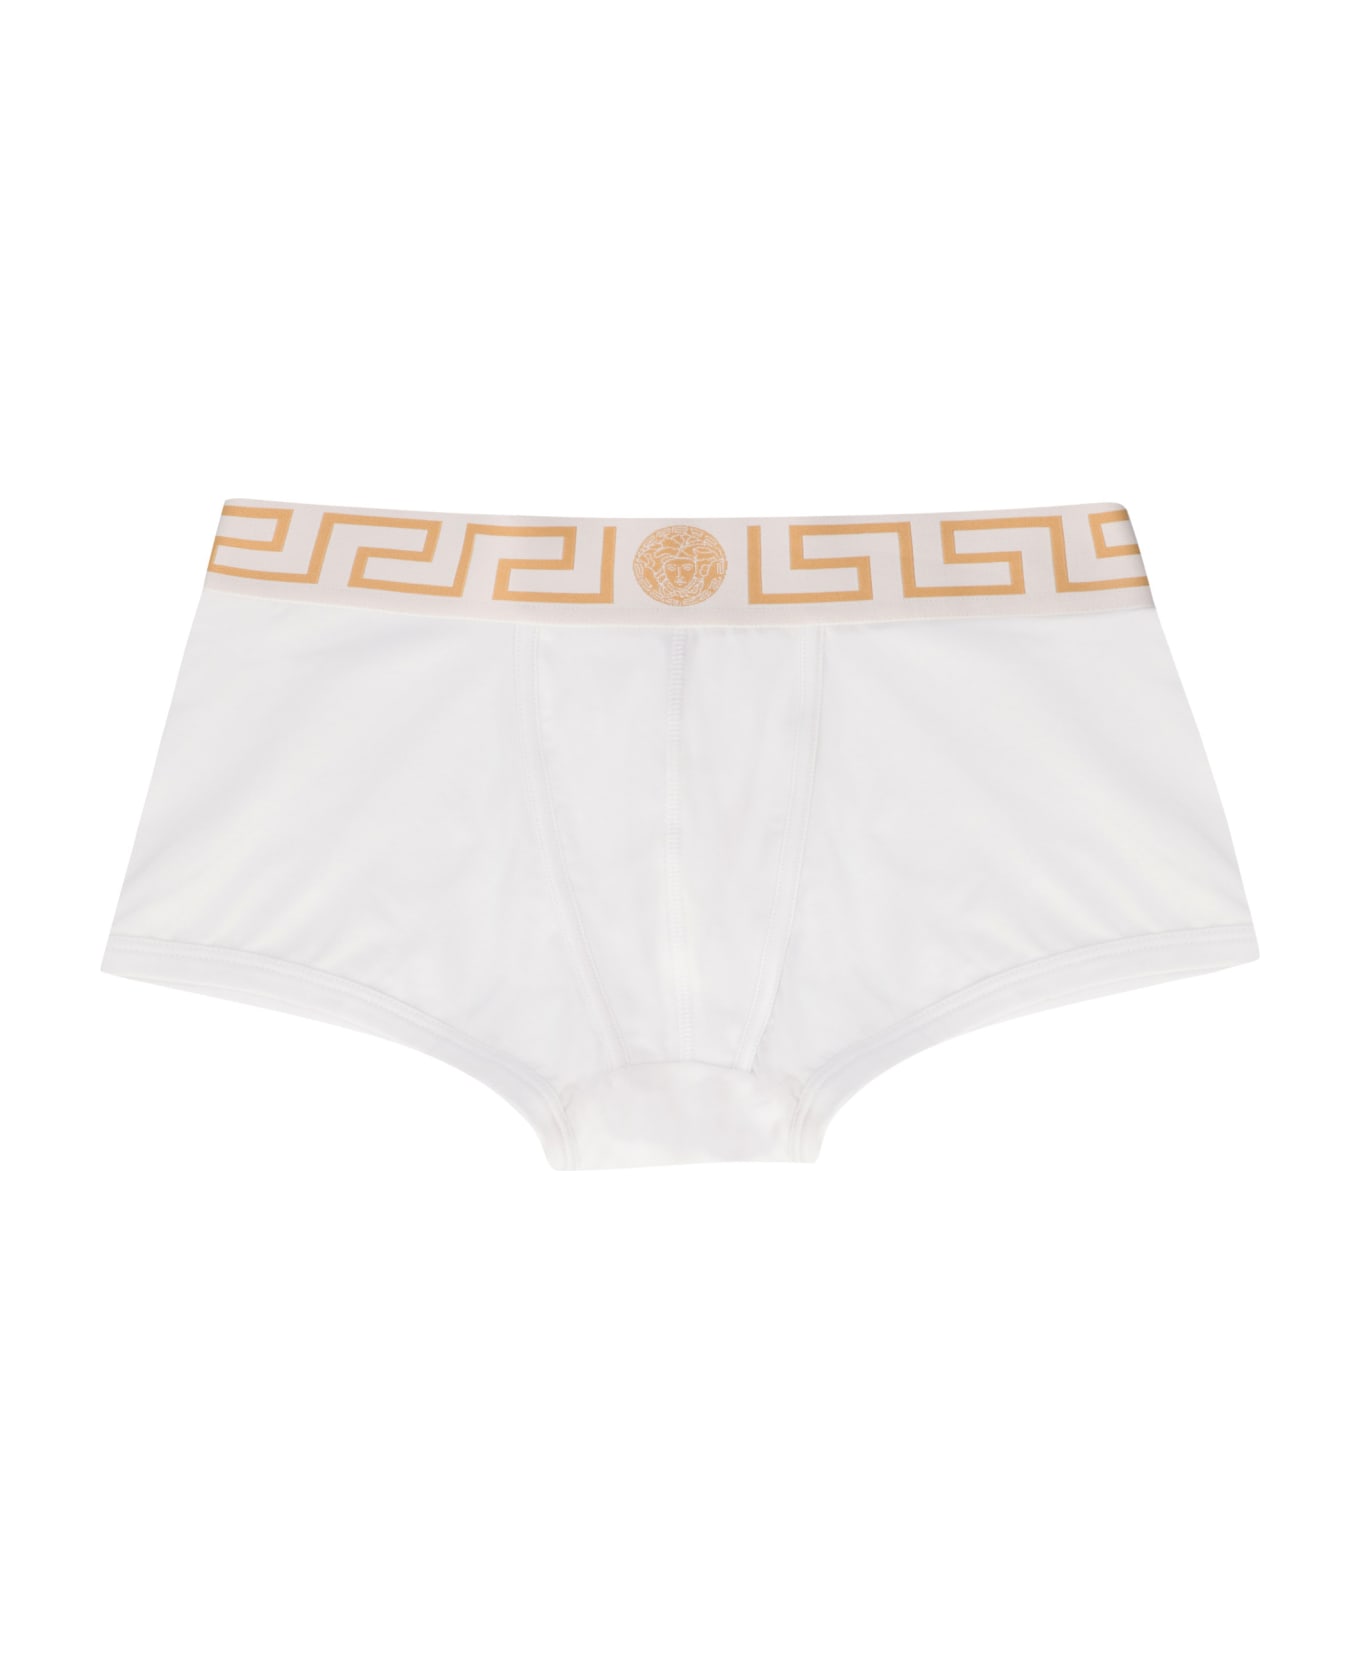 Versace Fine Cotton Trunks With Elastic Band - WHITE